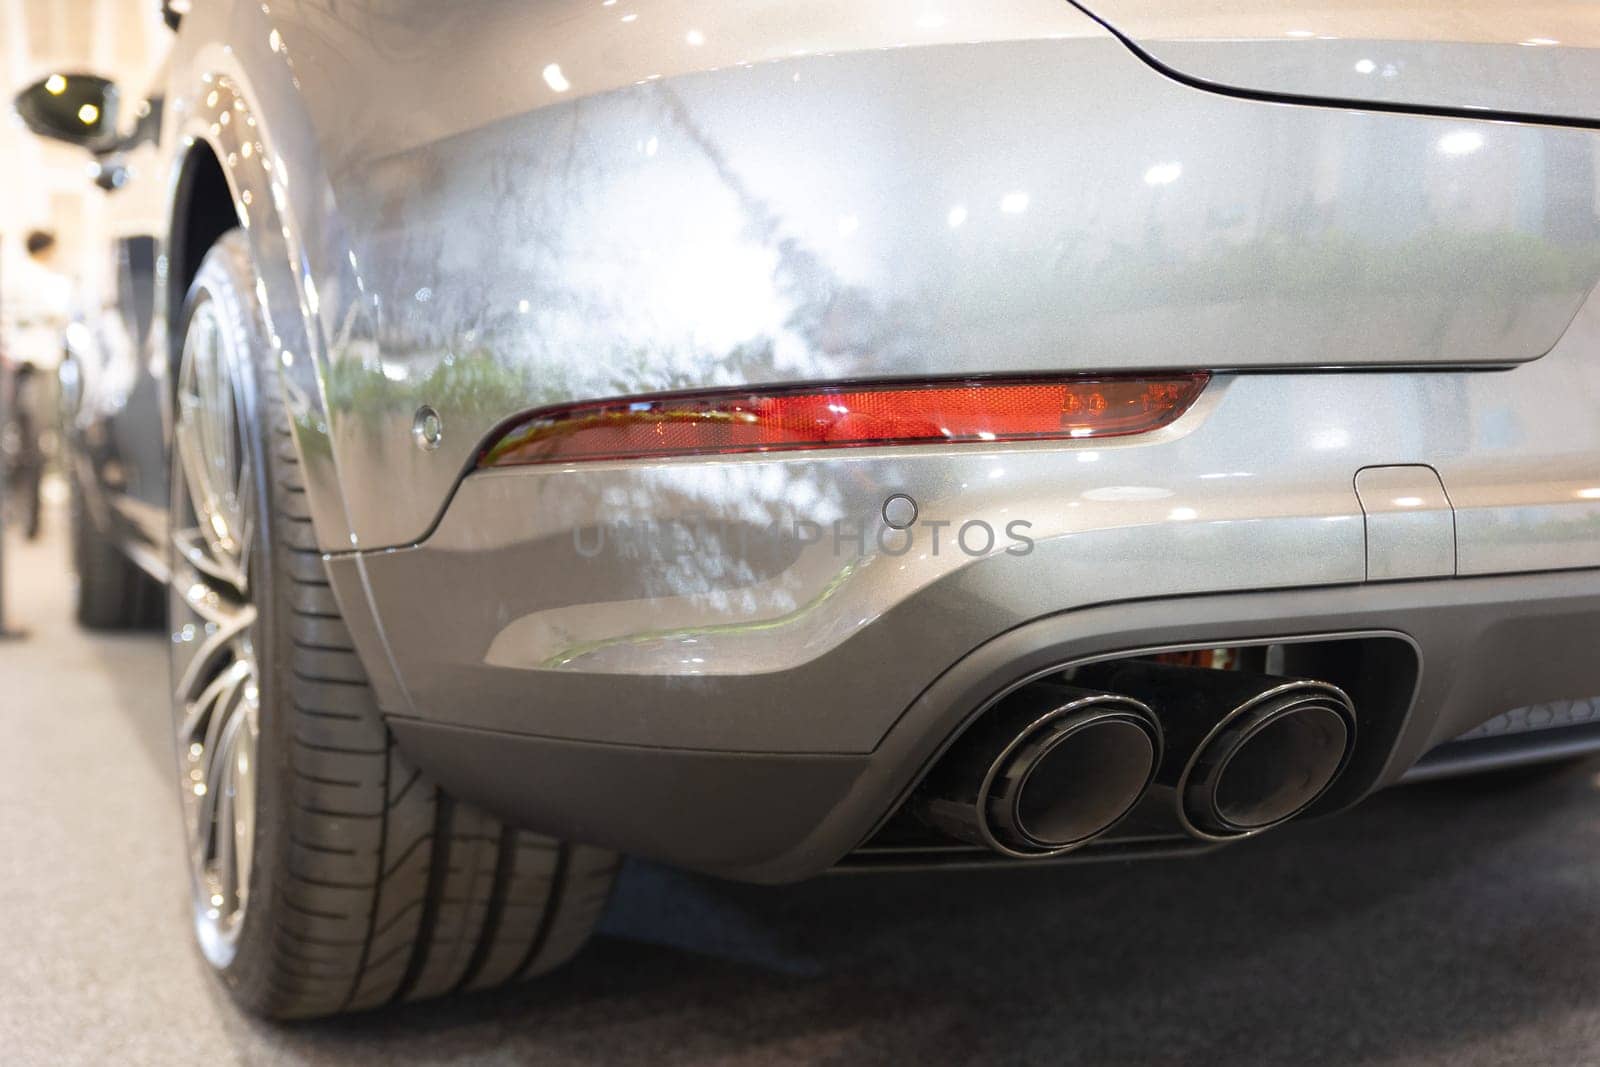 The rear end of a silver sports car